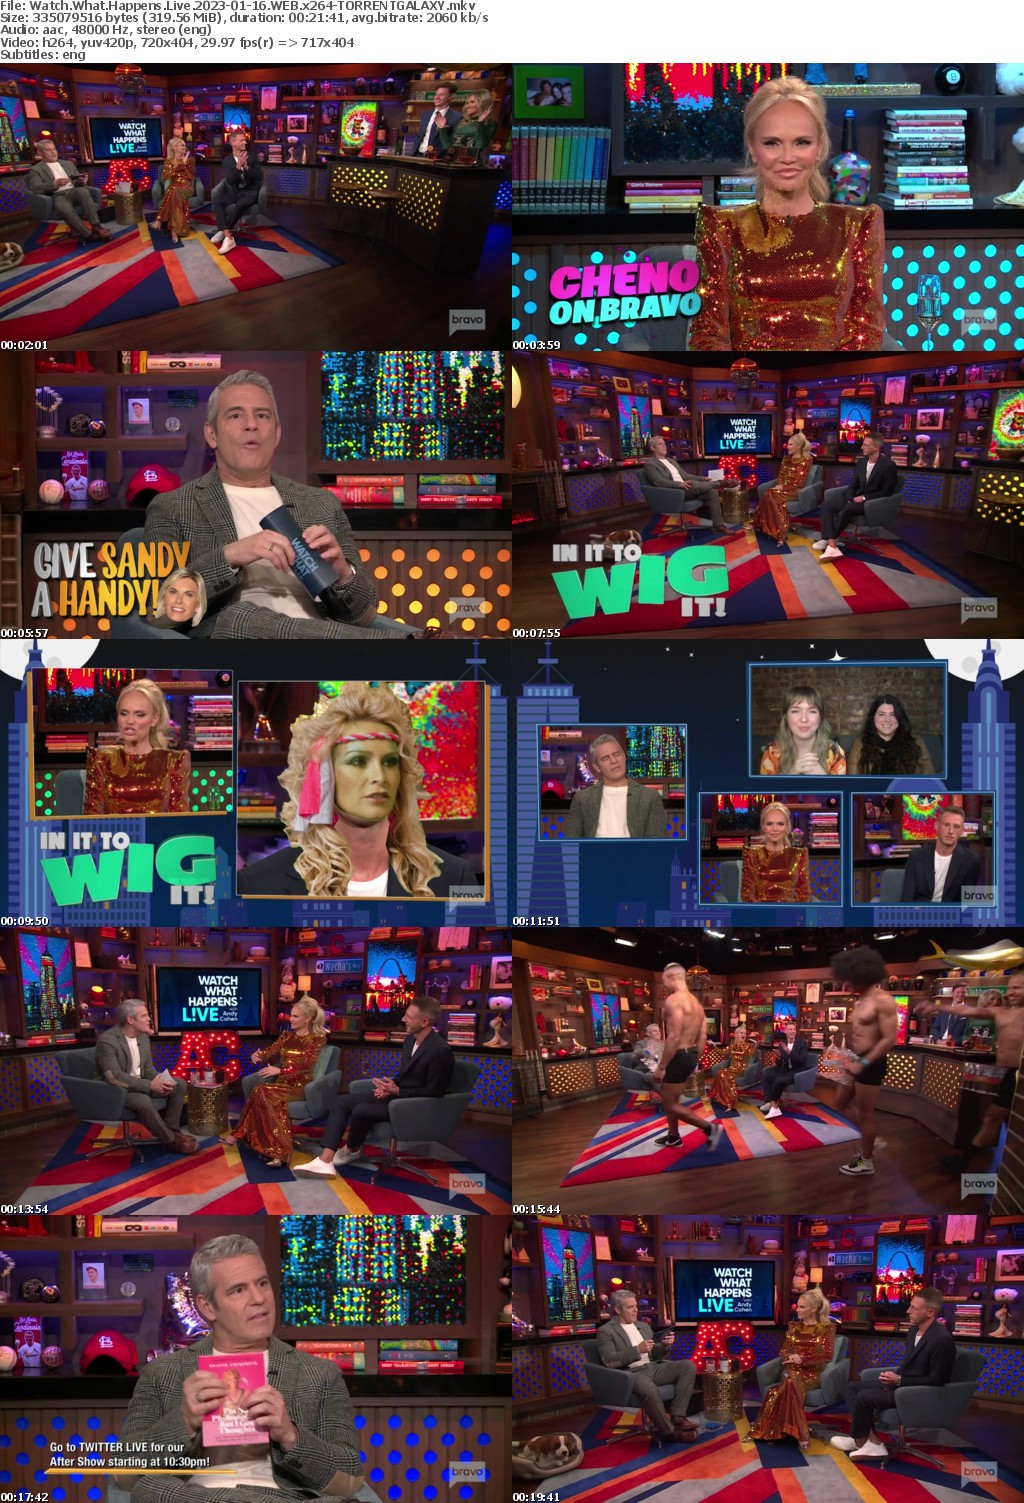 Watch What Happens Live 2023-01-16 WEB x264-GALAXY